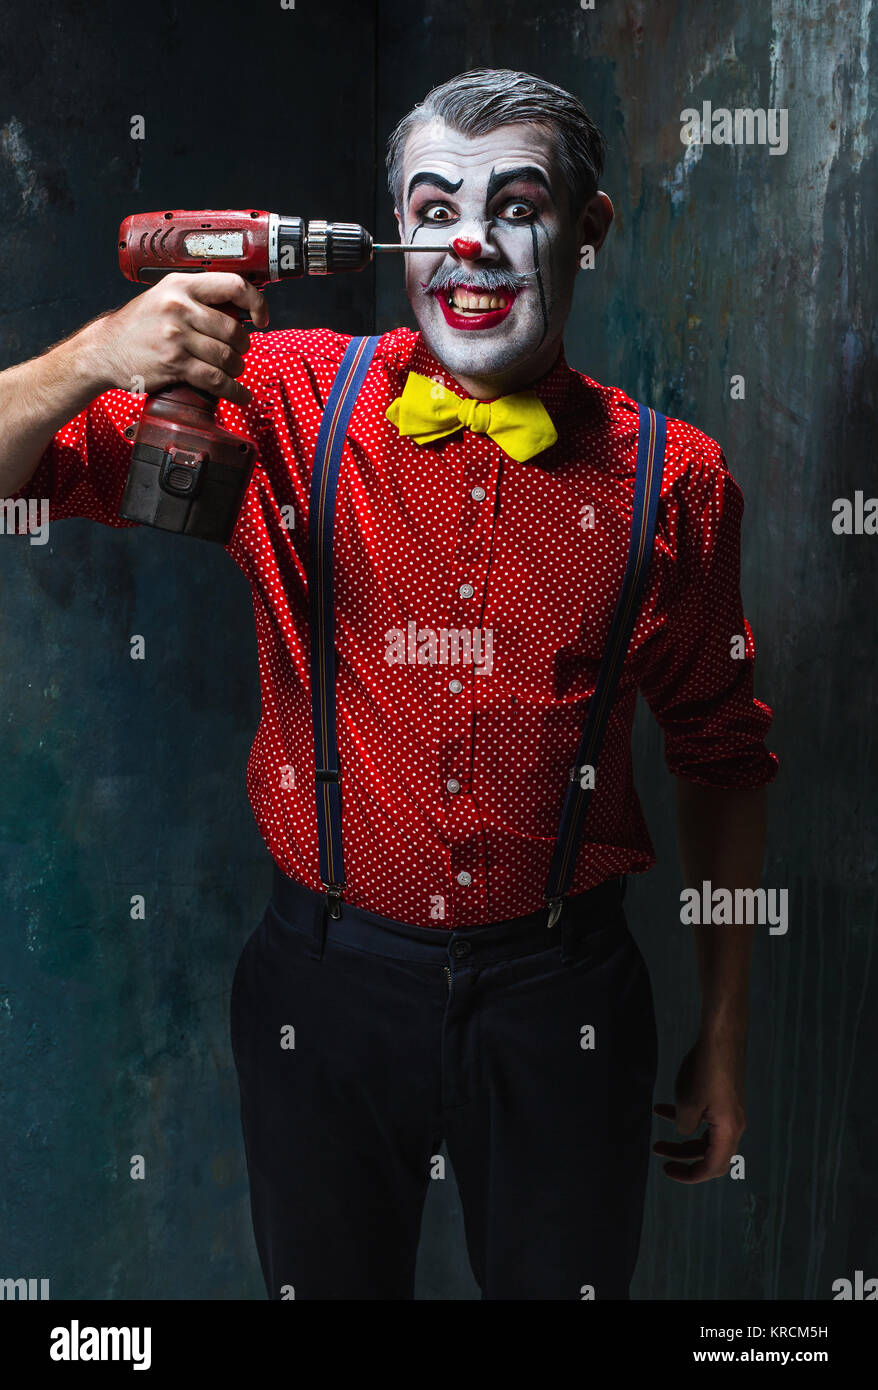 The scary clown and electric drill on dack background. Halloween concept Stock Photo